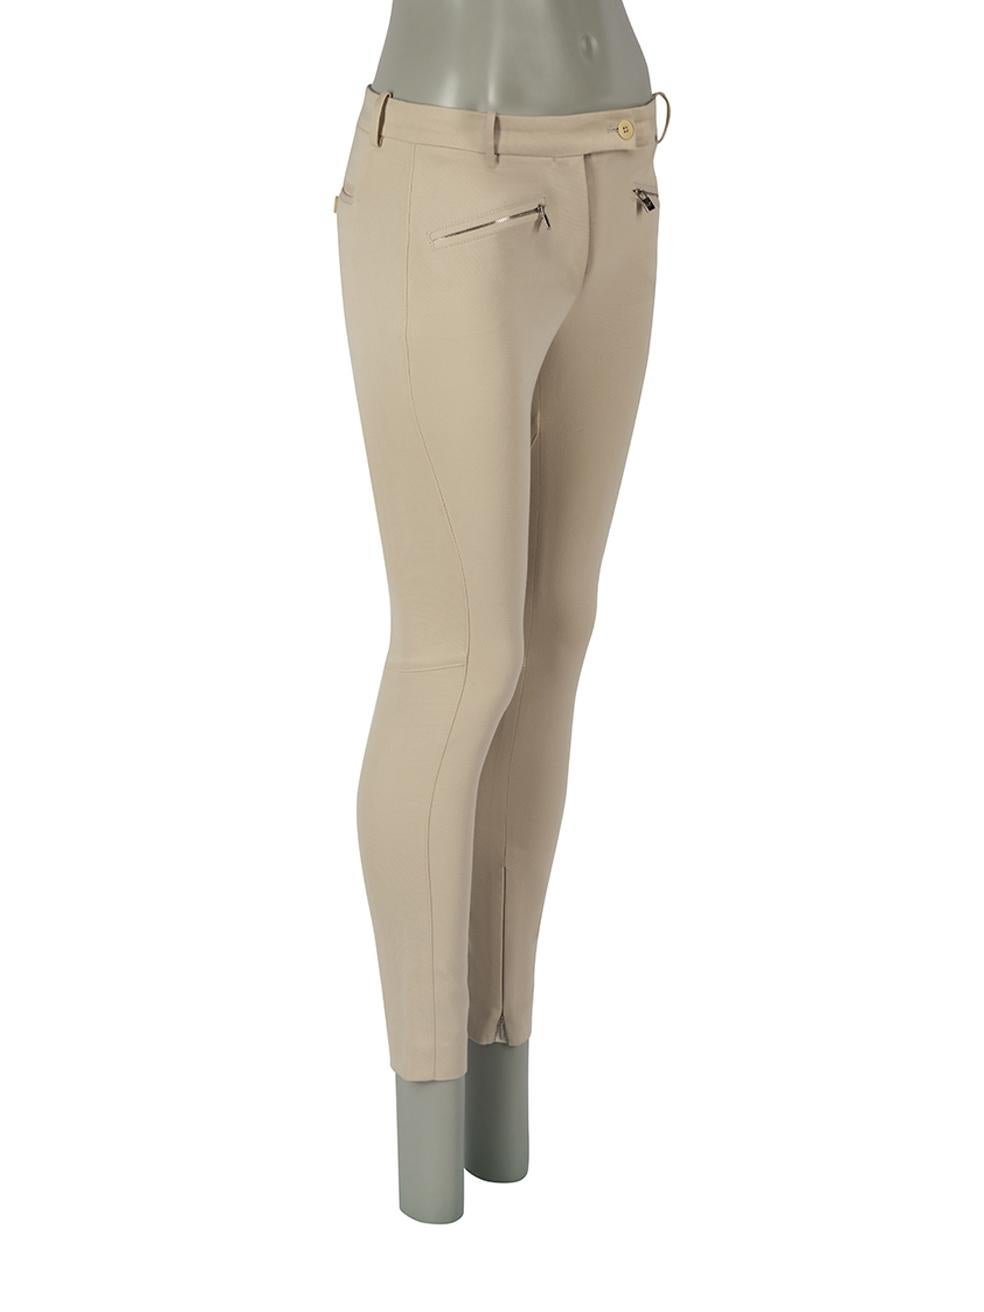 CONDITION is Good. Minor wear to trousers is evident. Light wear to fabric surface with one or two small discoloured marks found through the front leg on this used Loro Piana designer resale item.
 
 Details
 Ecru
 Cotton
 Skinny trousers
 Mid rise
